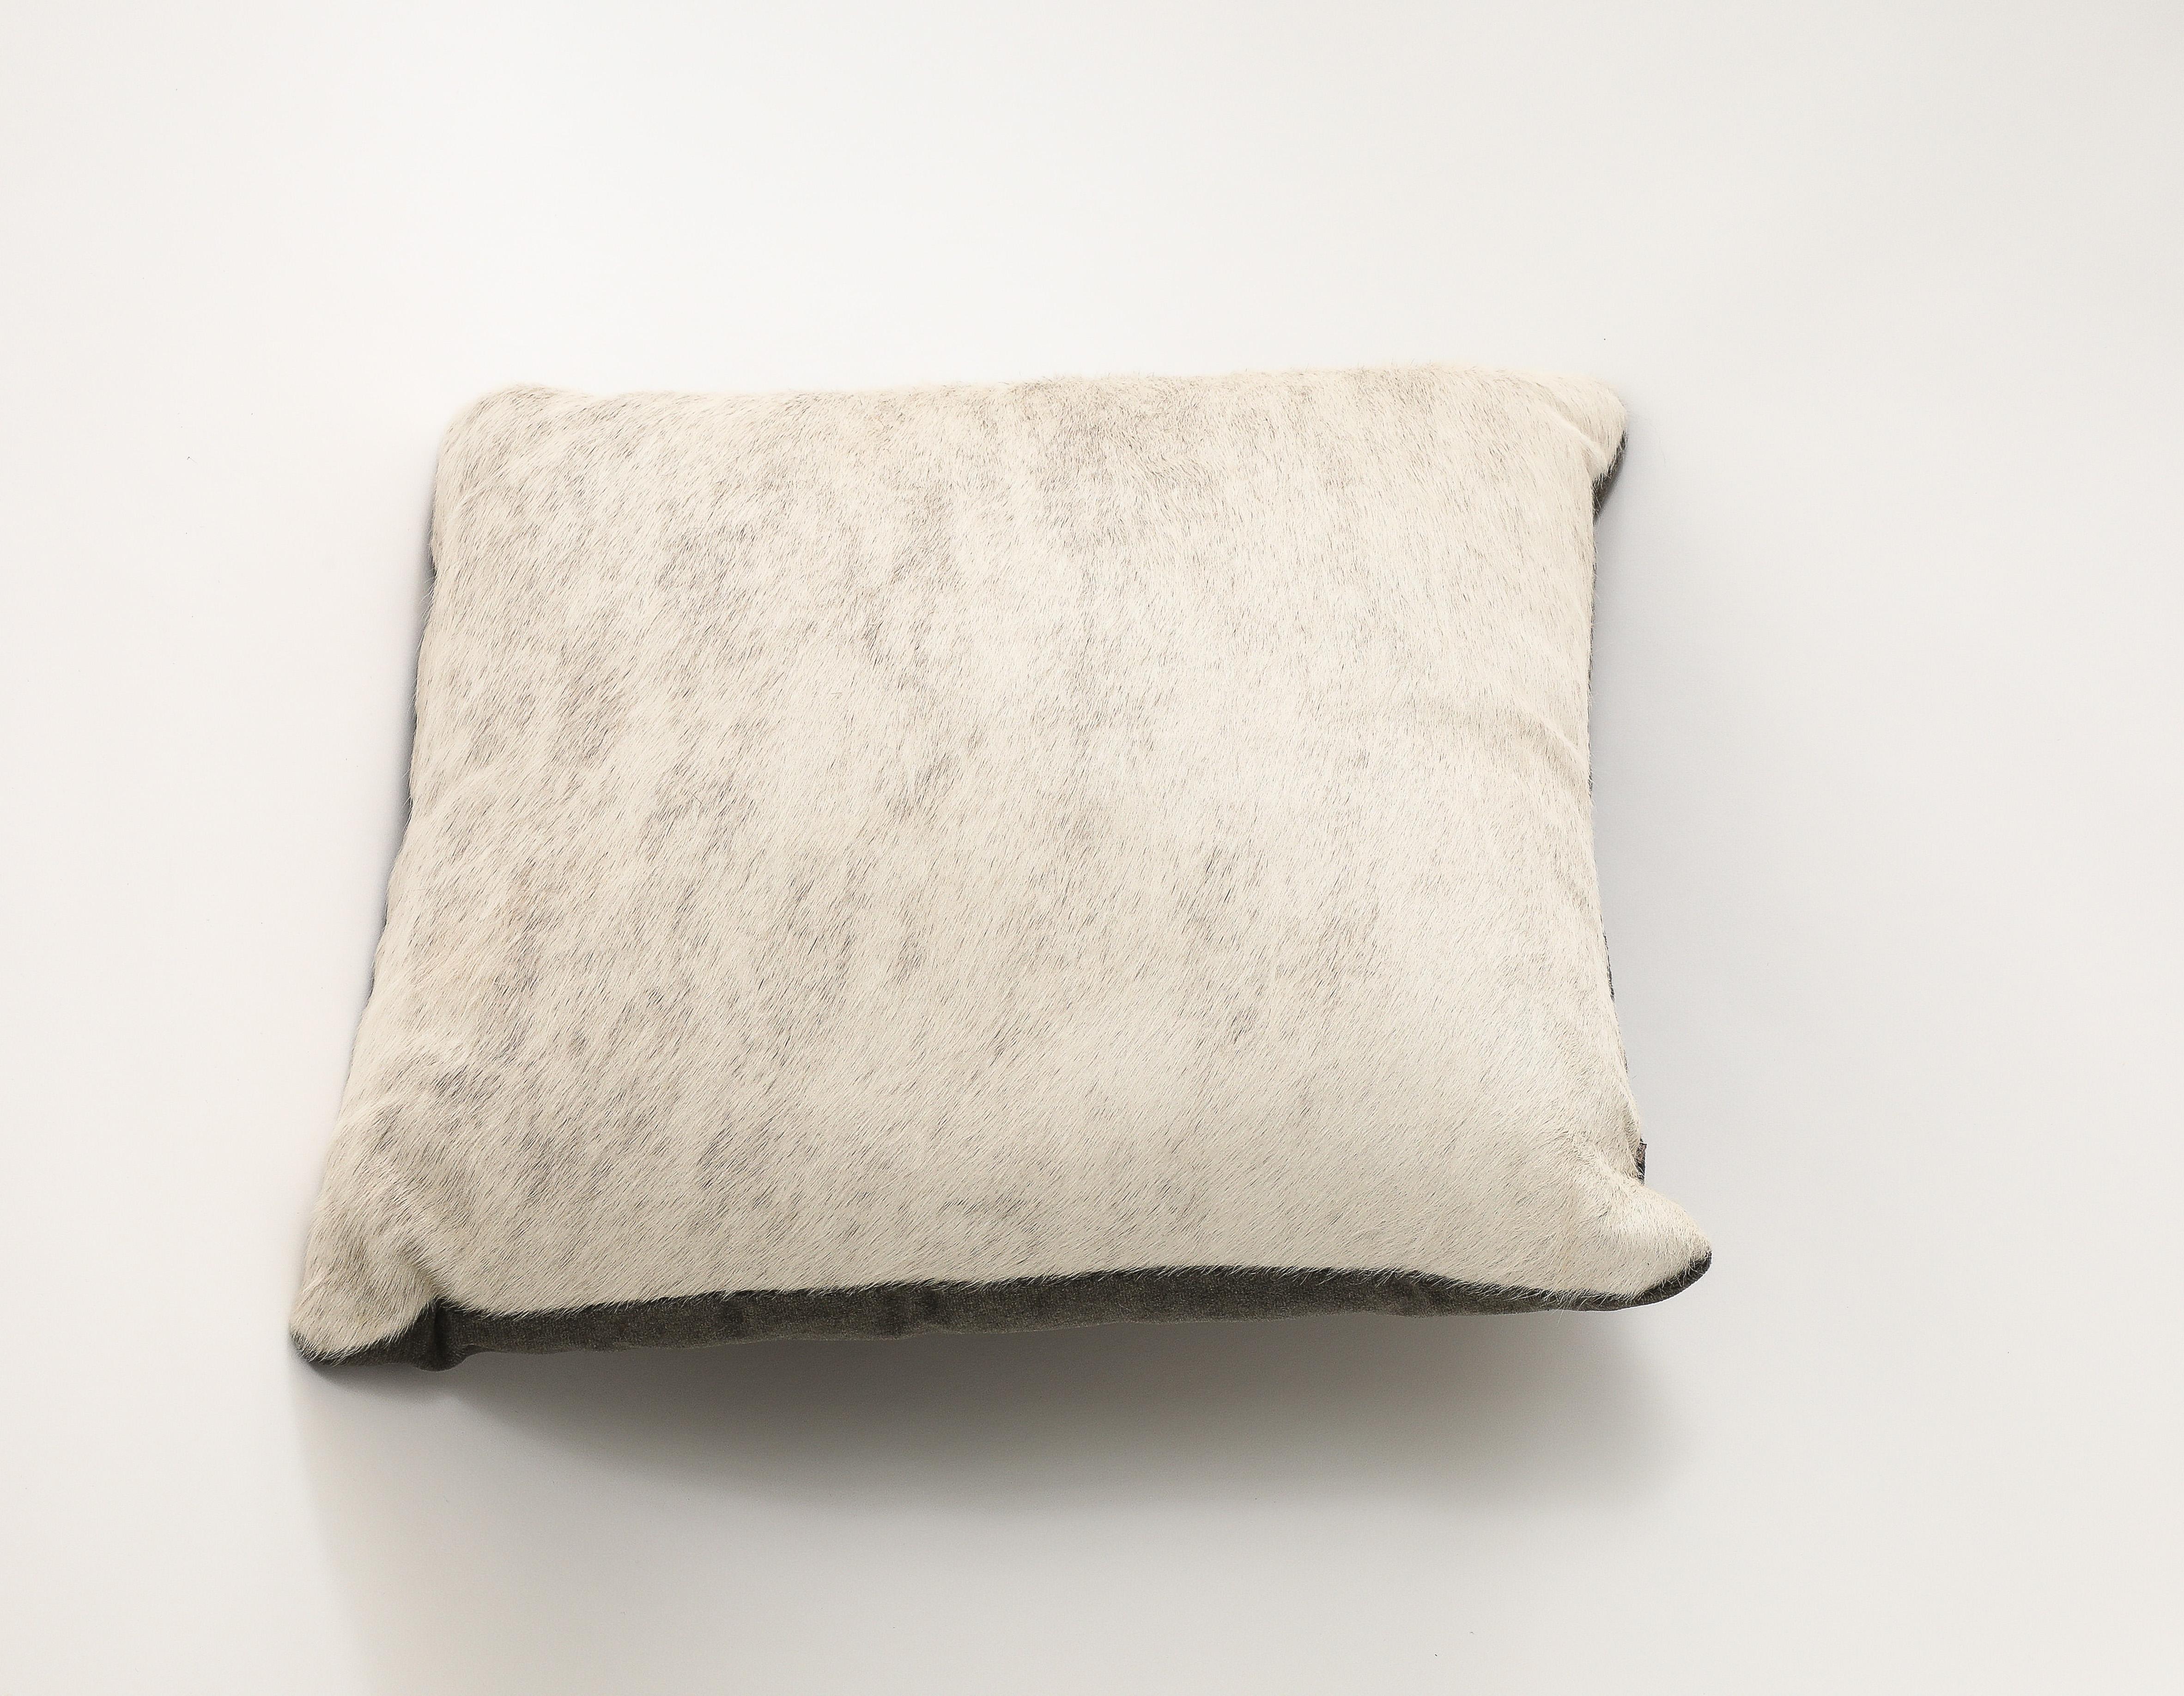 Off white, Grey brindle pony hide pillow with a grey cotton velvet back. 
Feather & Down insert, zipper on side